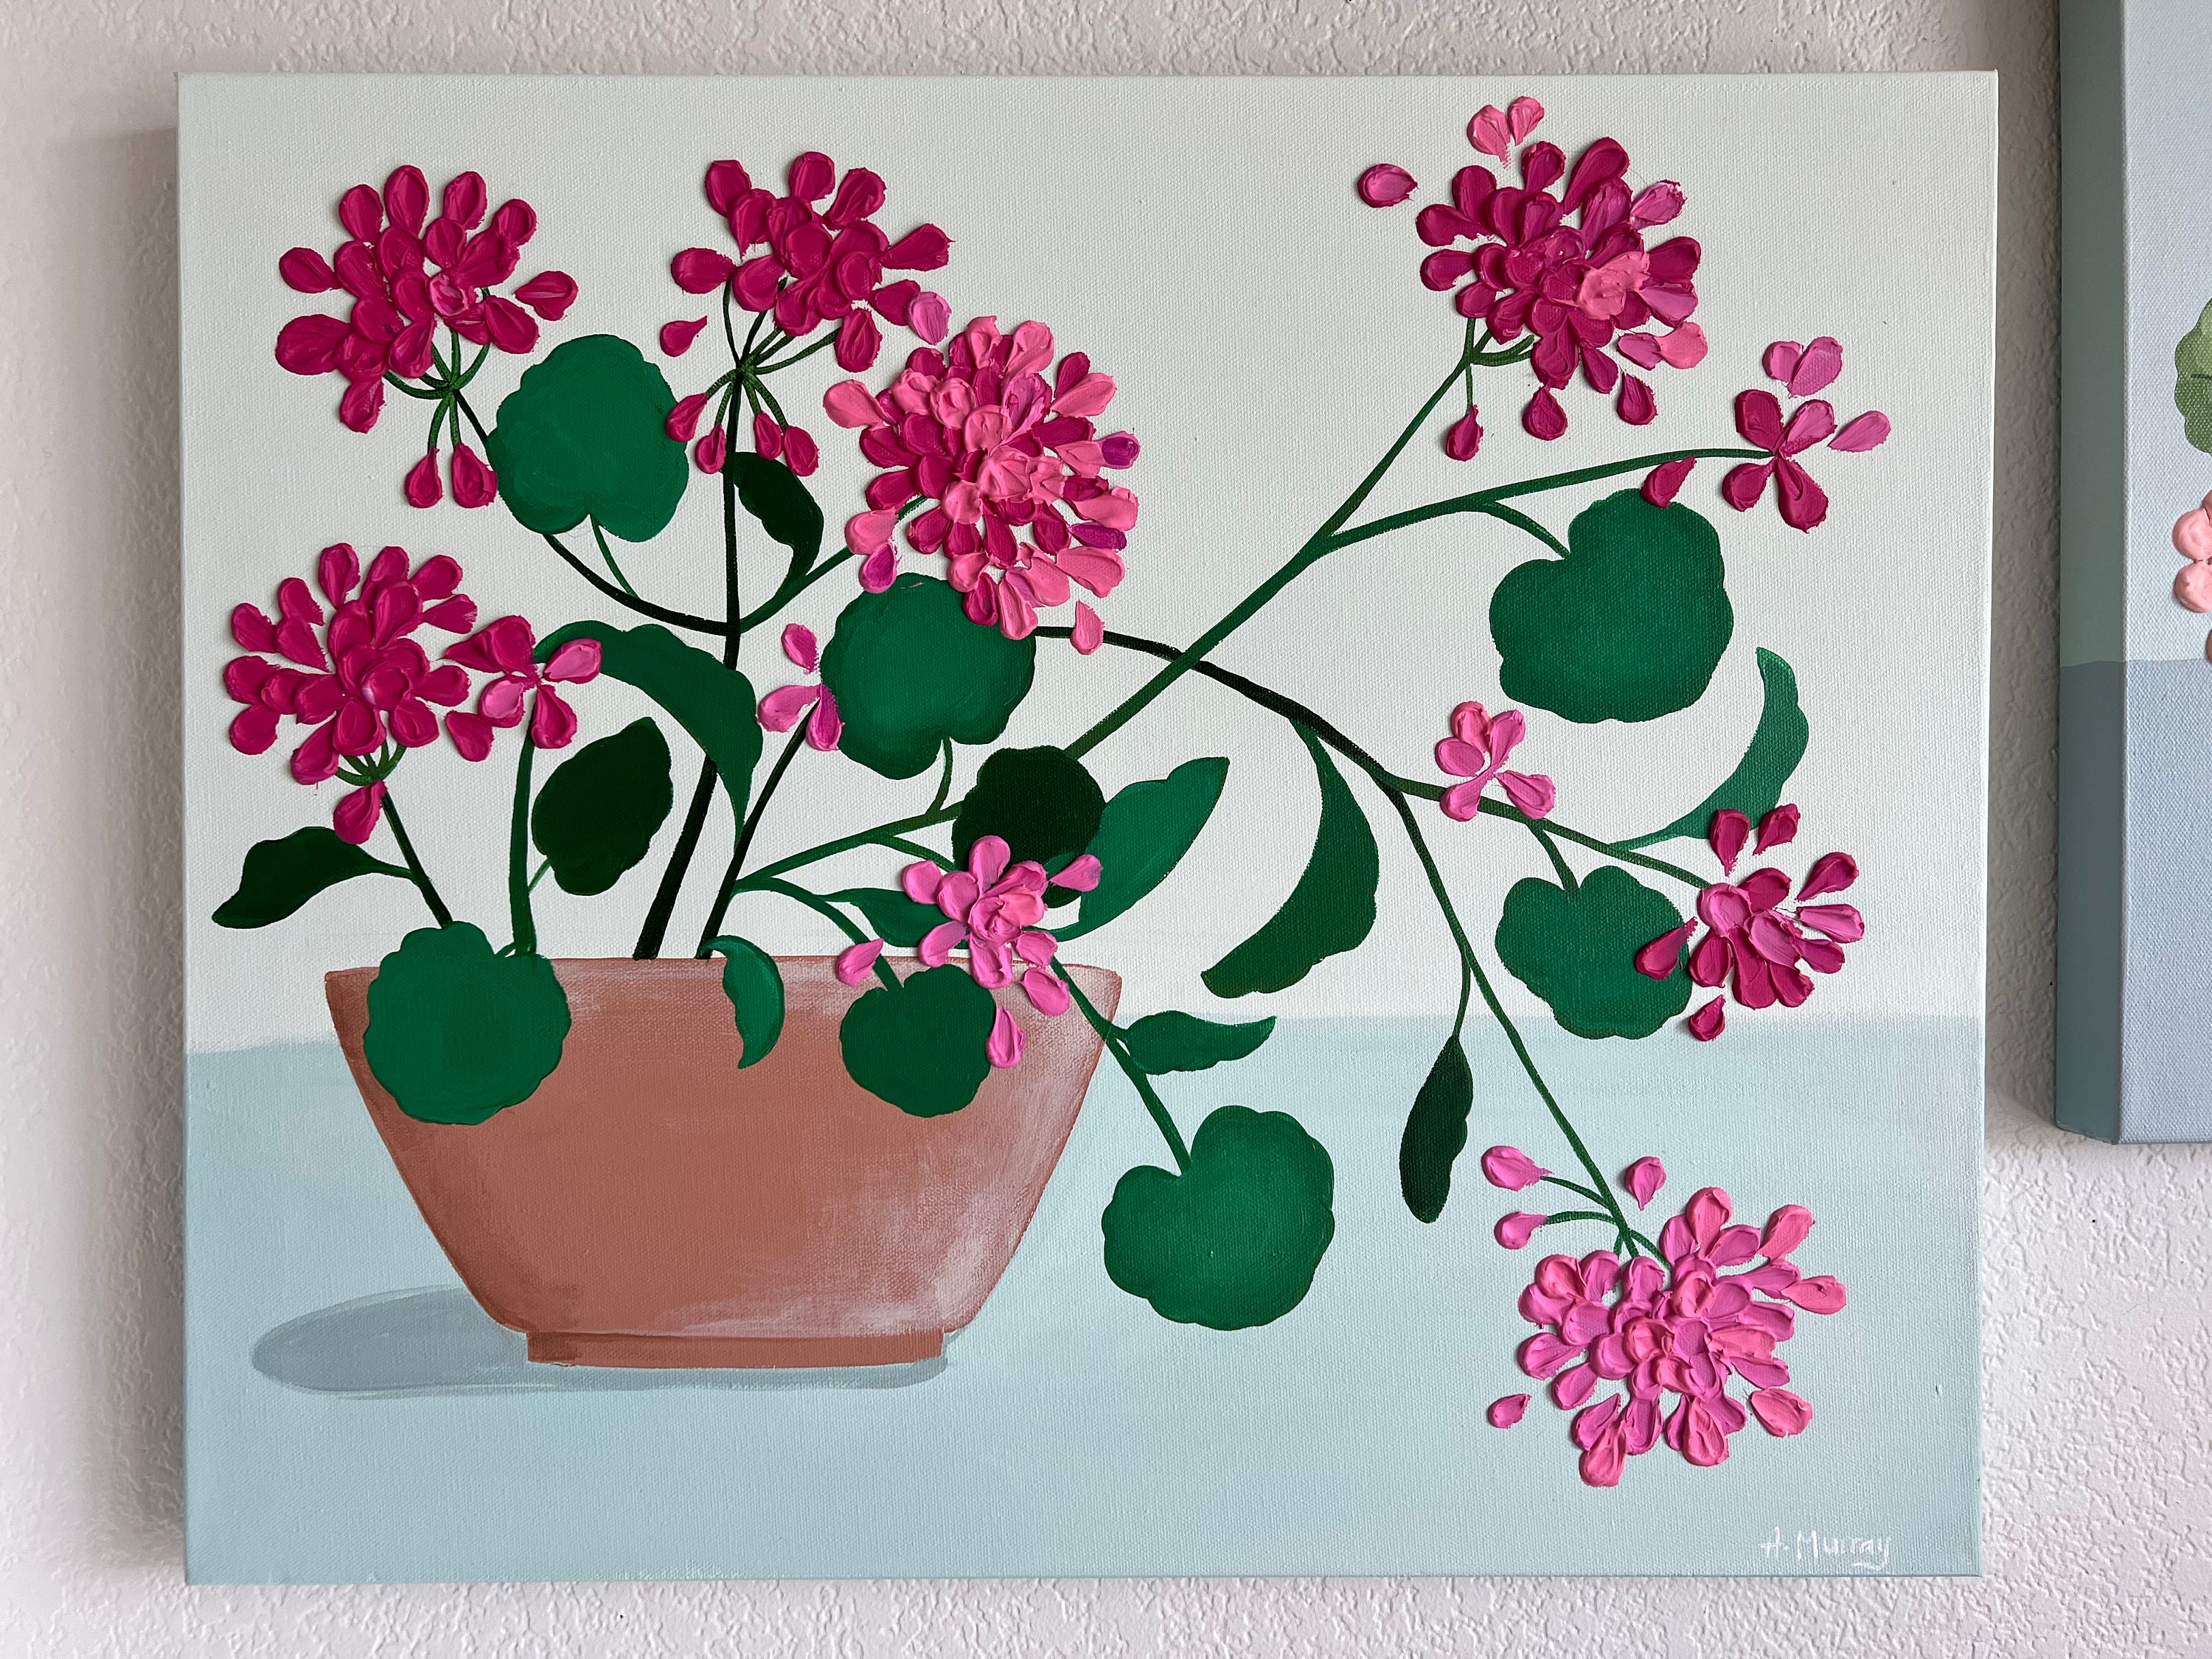 Paint With Texture: Create an Impasto Style Potted Geranium in Acrylic, Amie Murray